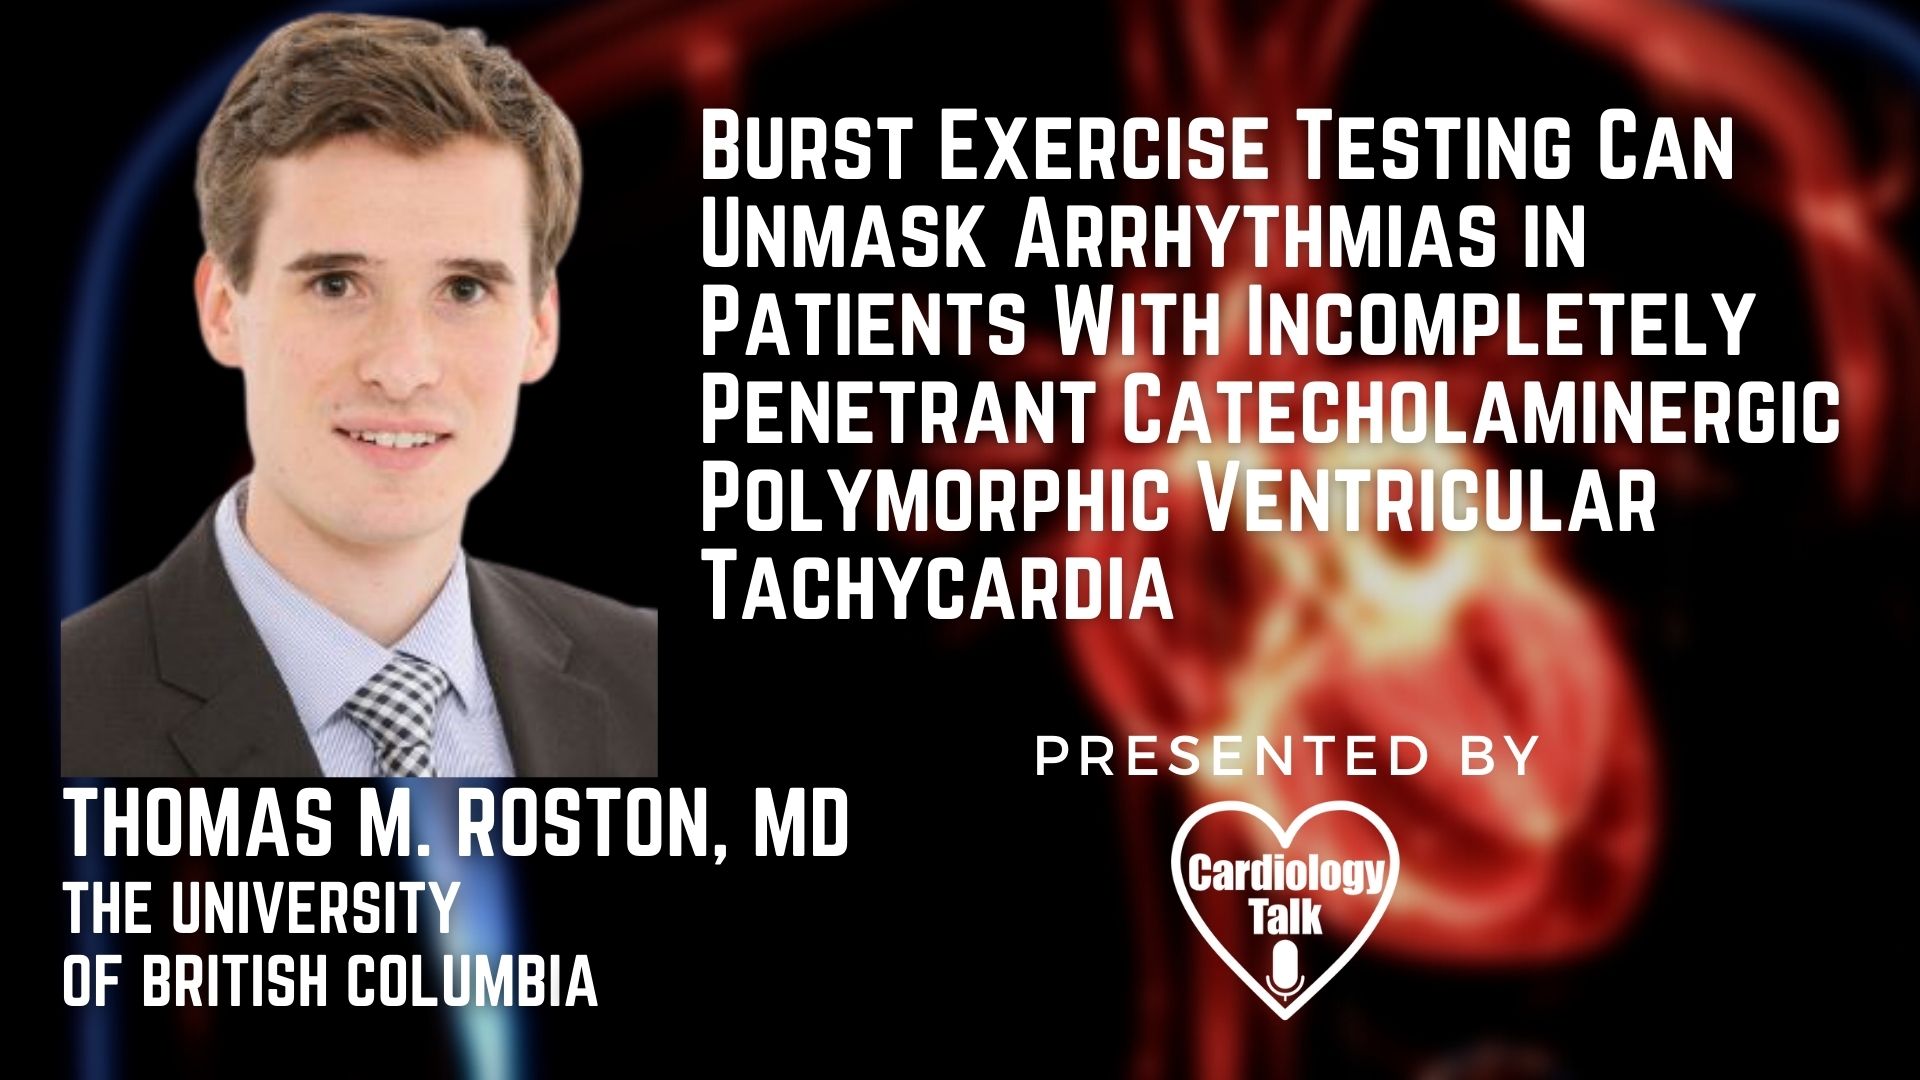 Thomas M. Roston, MD @AndrewKrahnMD @UBC #CPVT #Cardiology #Research Burst Exercise Testing Can Unmask Arrhythmias in Patients With Incompletely Penetrant CPVT